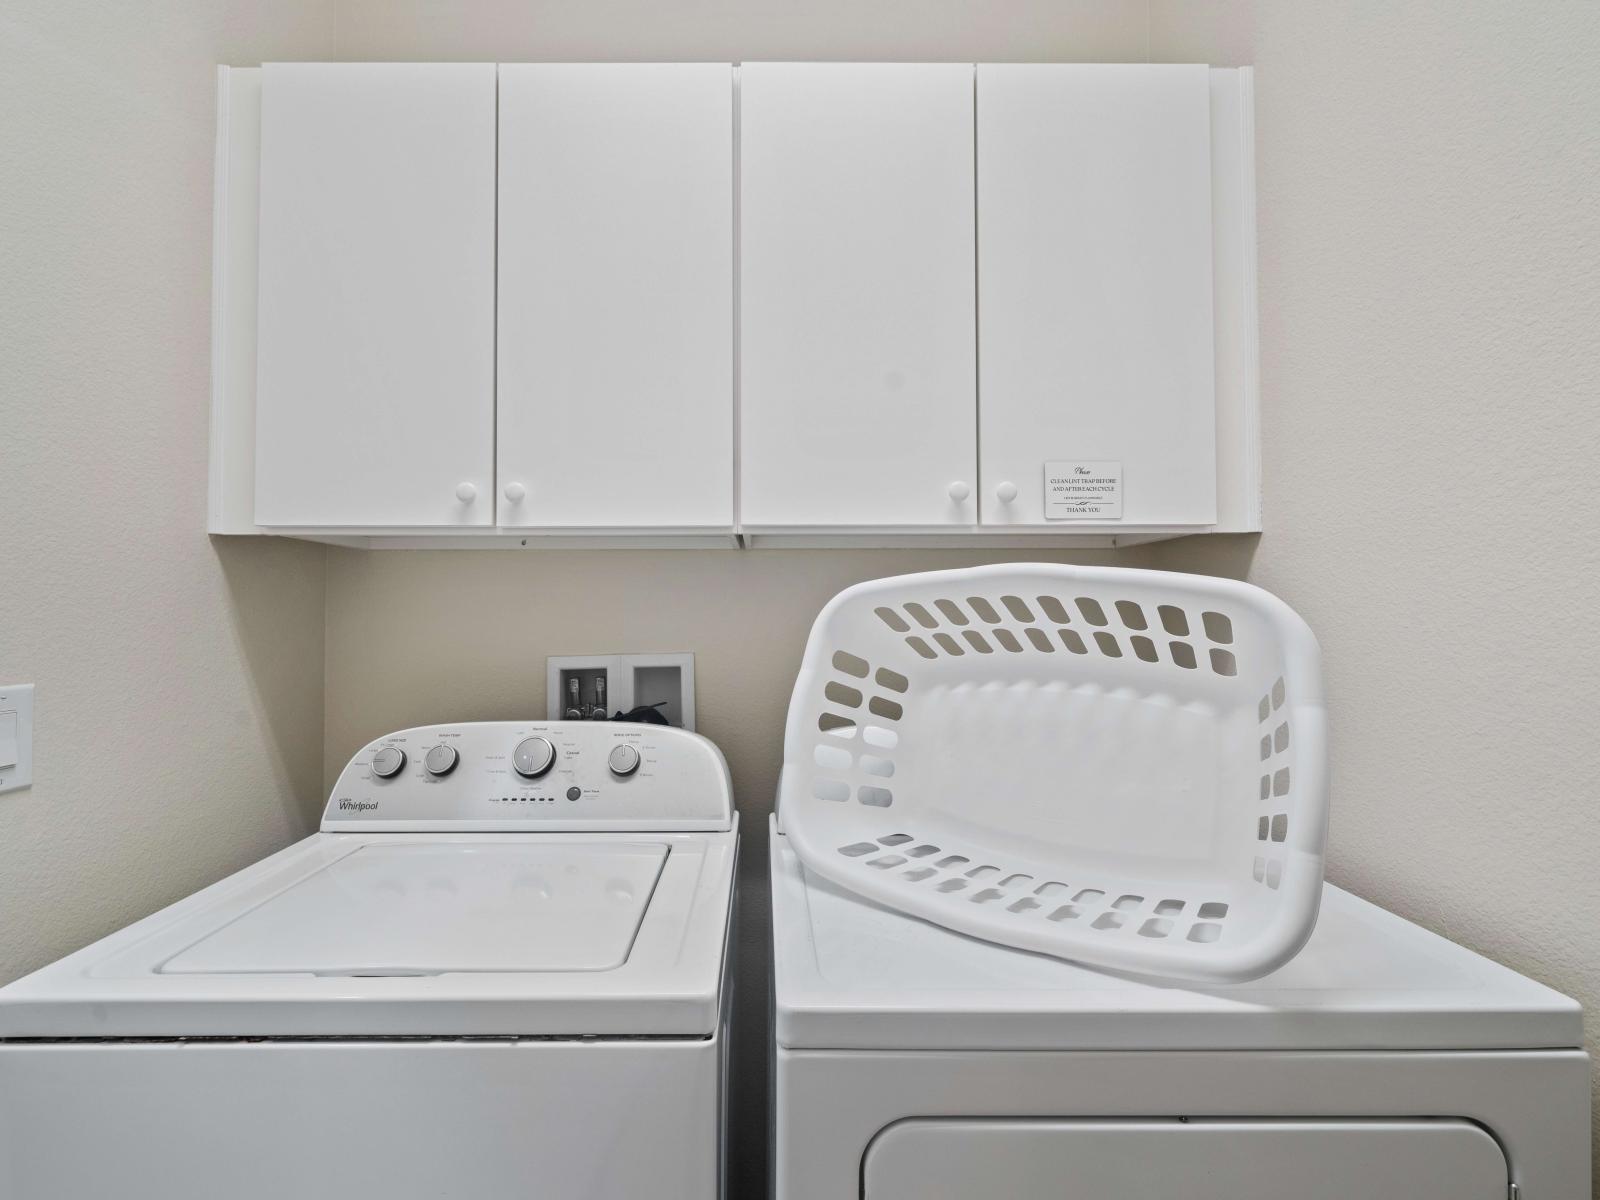 Free Washer and Dryer